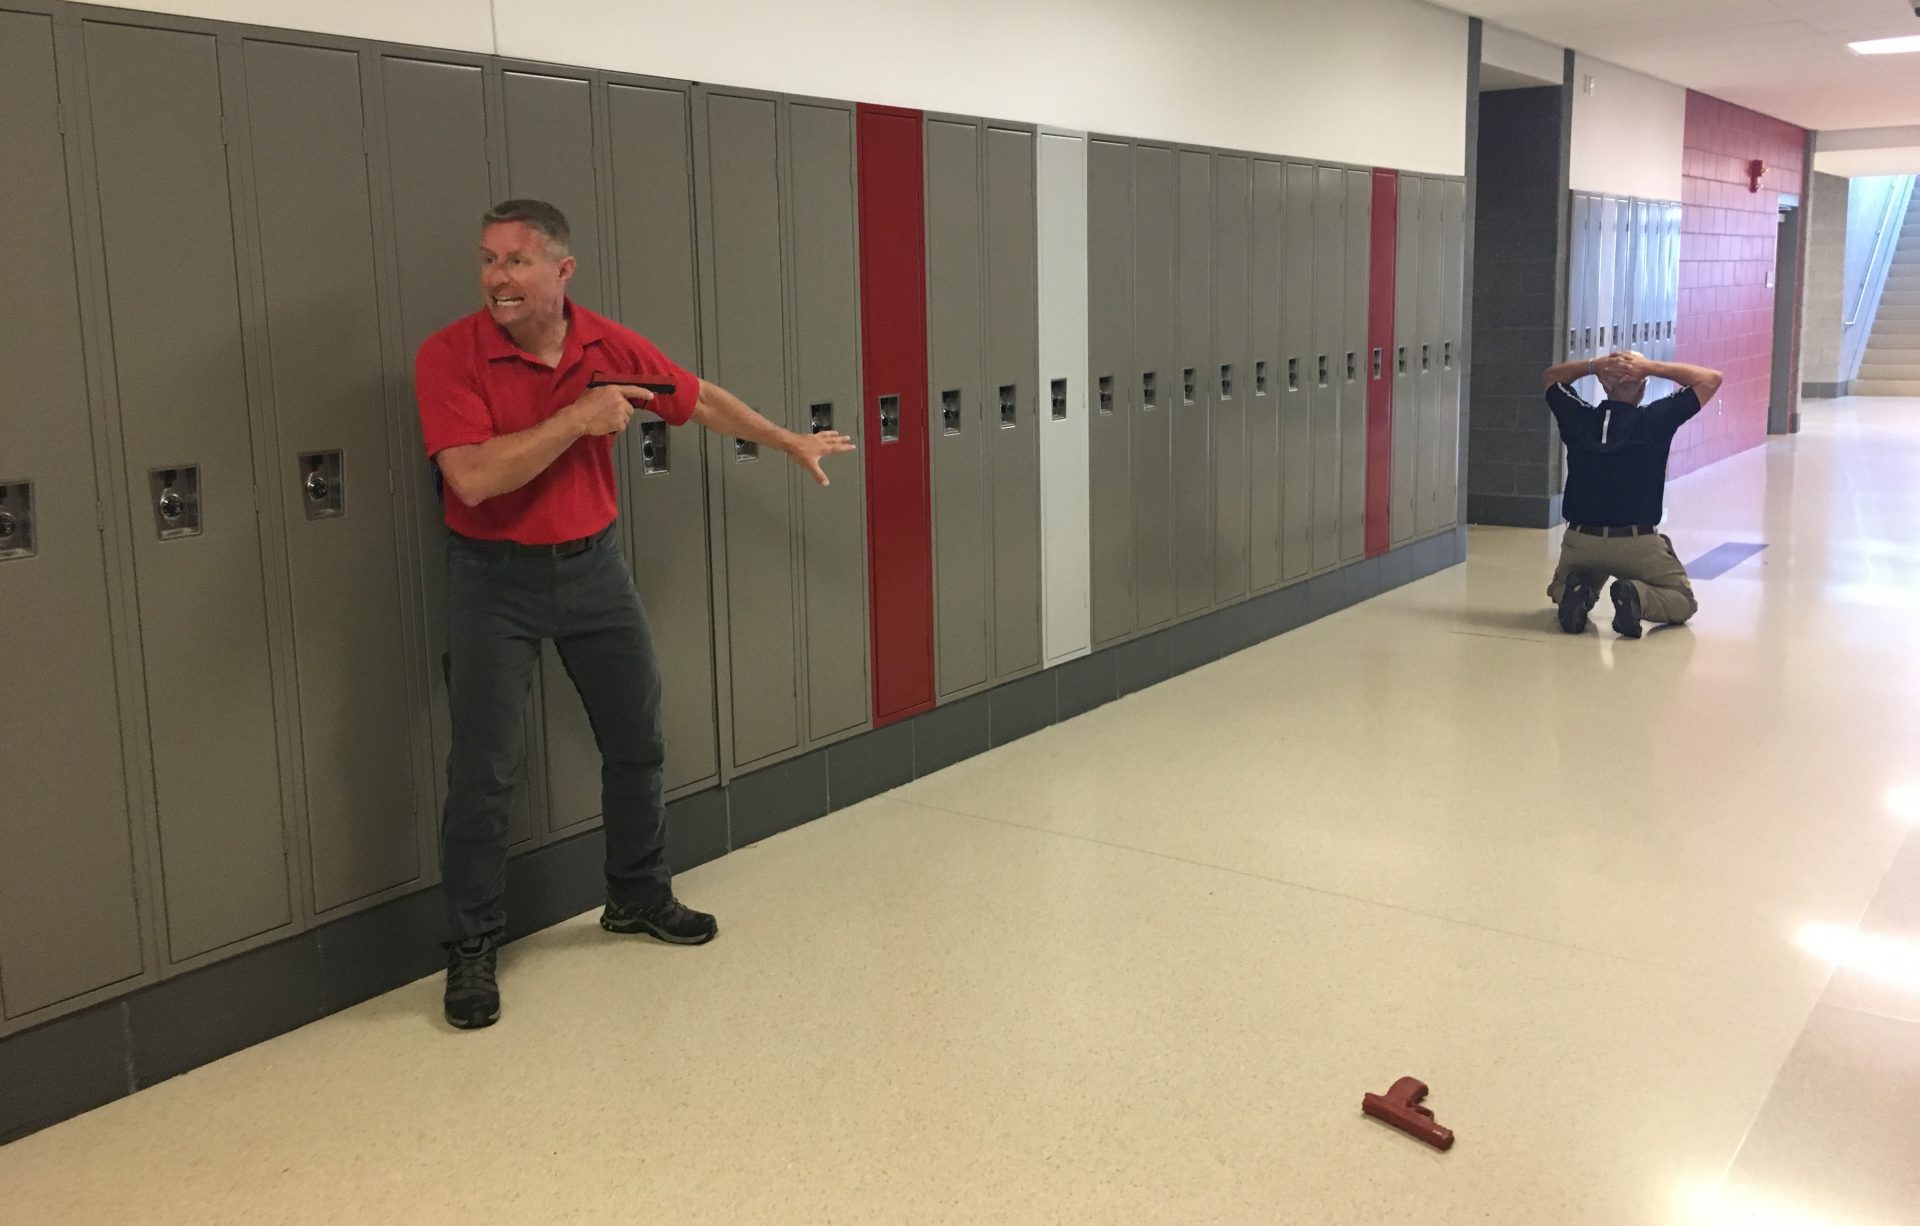 Ohio teachers participate in a school shooting simulation run by FASTER.